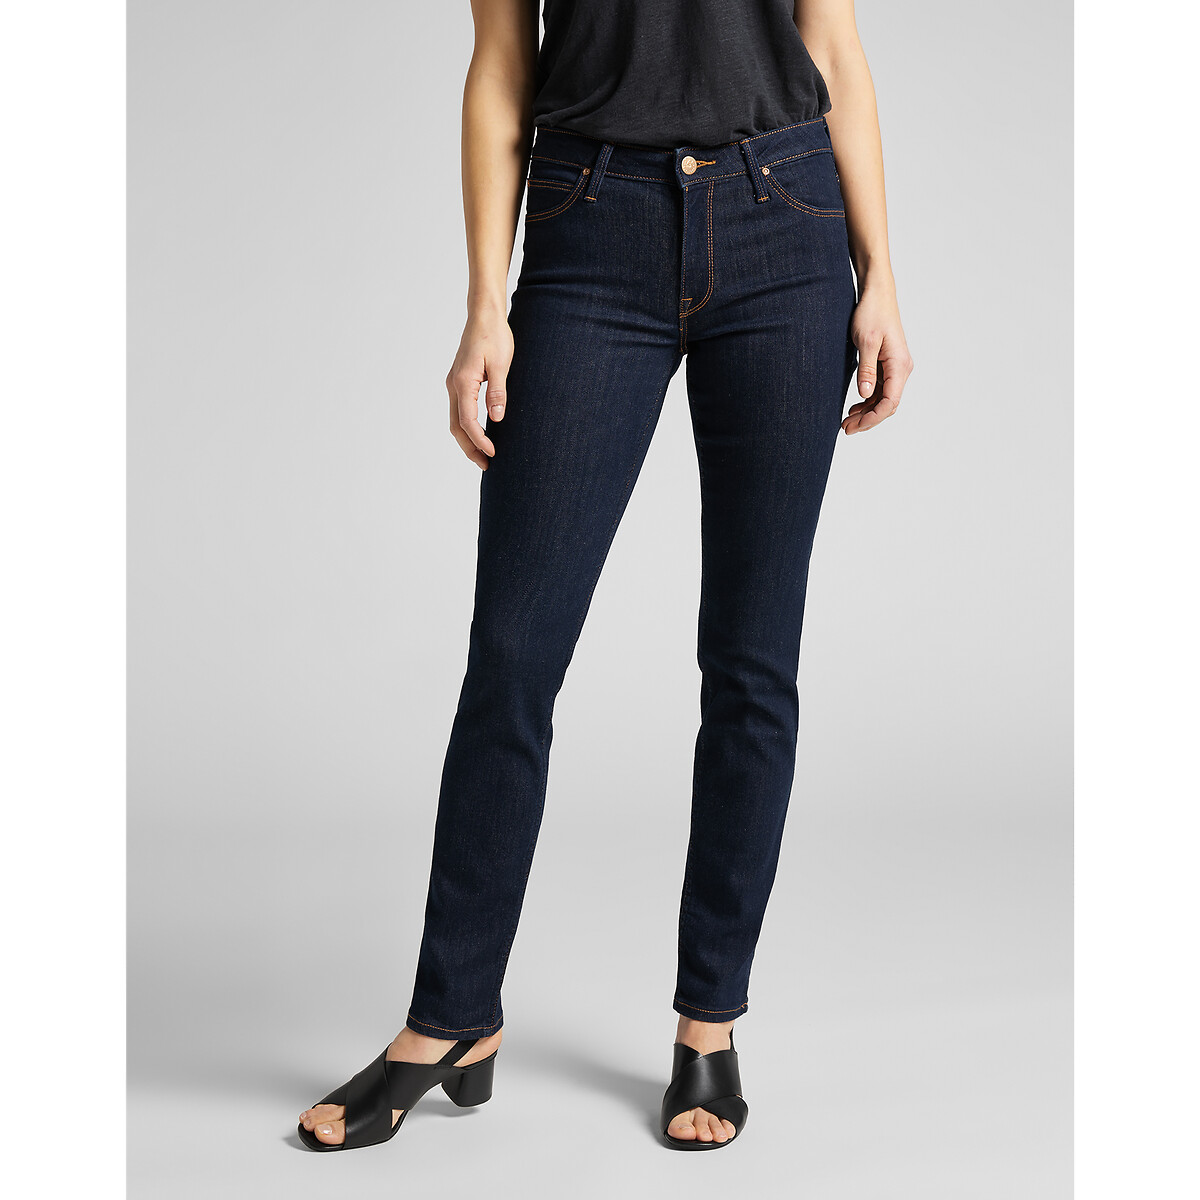 Elly Slim Fit Jeans with High Waist